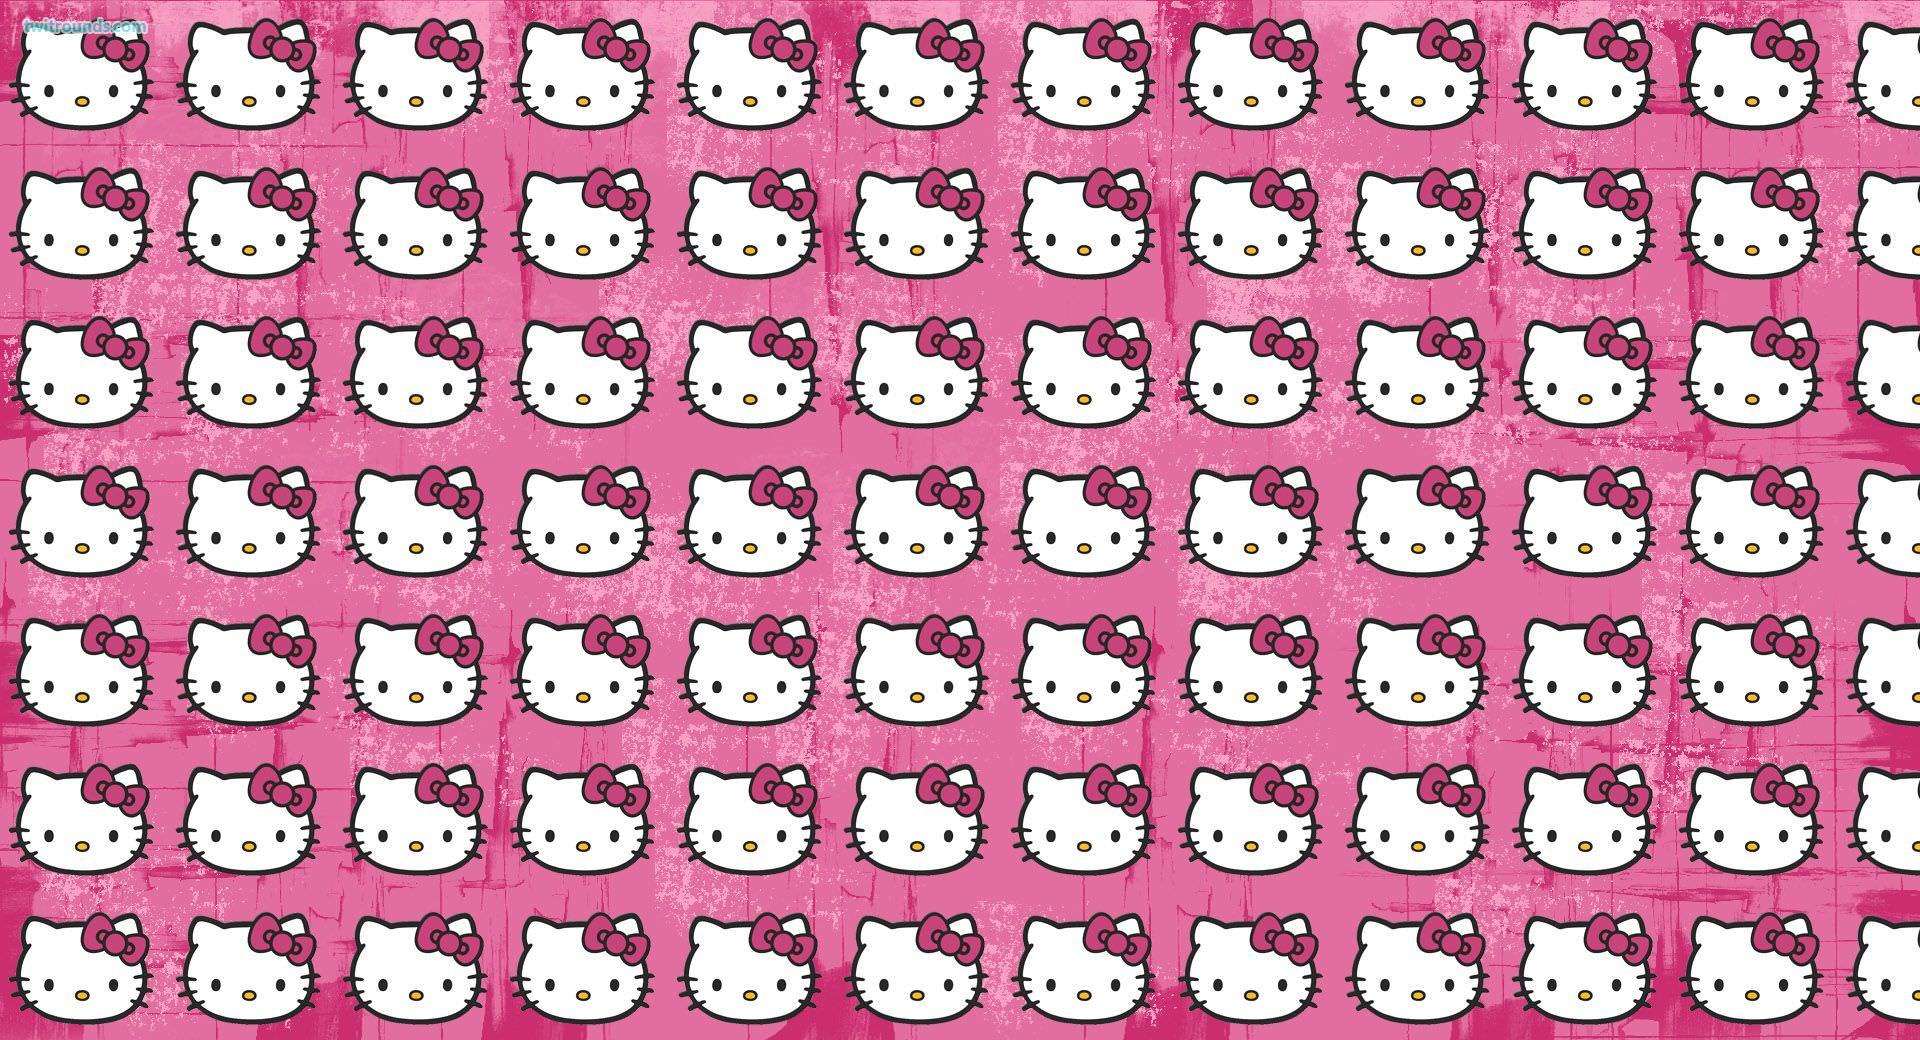 Hello Kitty Background, Wallpaper, Image. Design Trends PSD, Vector Downloads